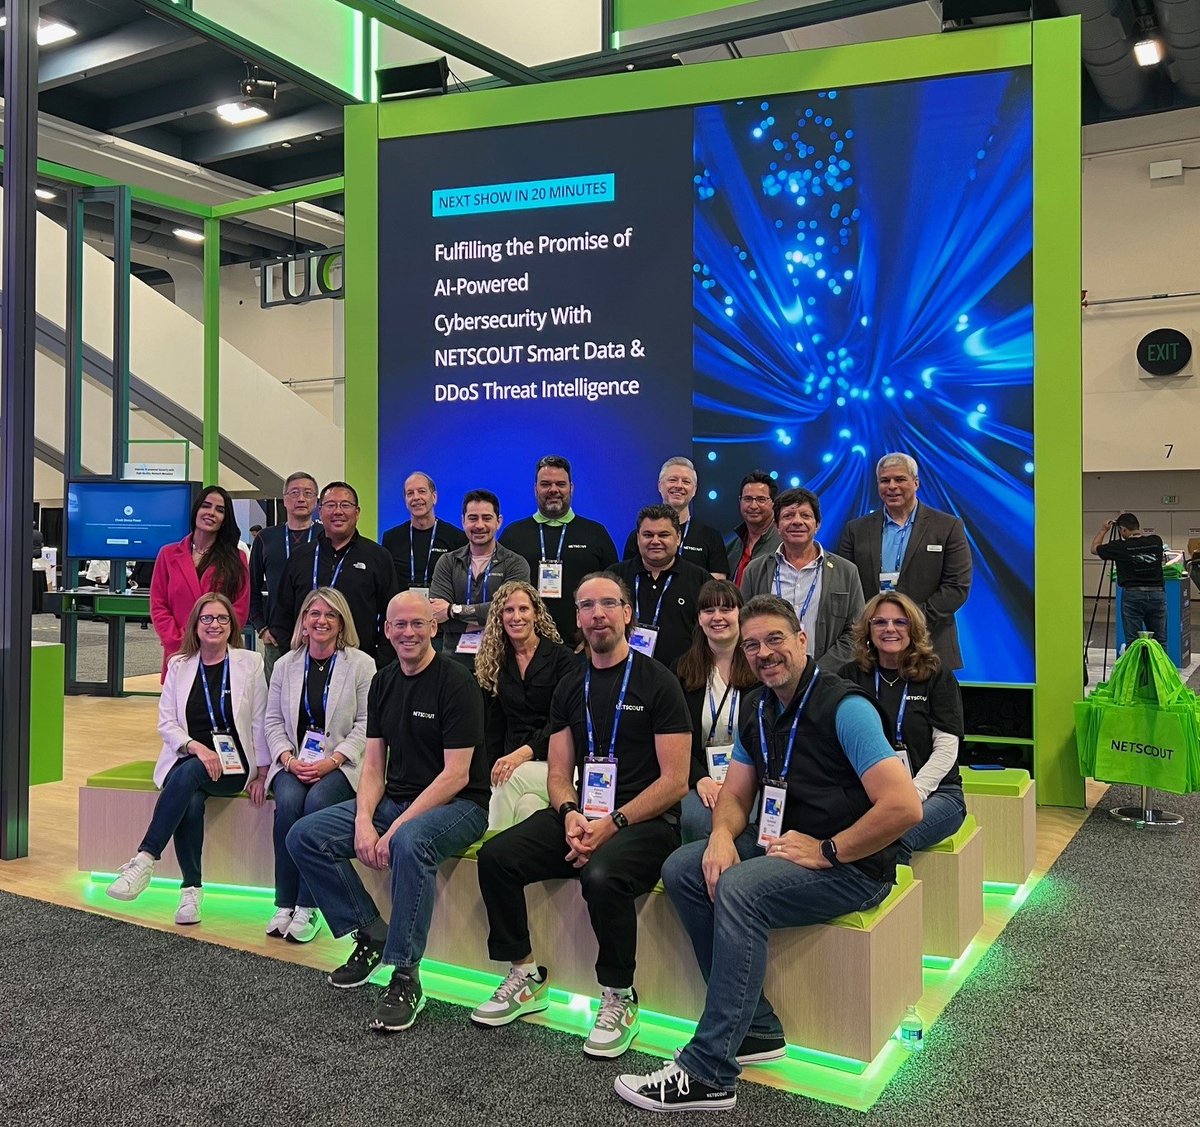 Cheers from the NETSCOUT crew at #RSCA! 📸 We're not just striking a pose for this epic group photo but also giving live demos and forging partnerships. Stop by our booth to join the excitement; we're eager to see where these conversations will take us next!